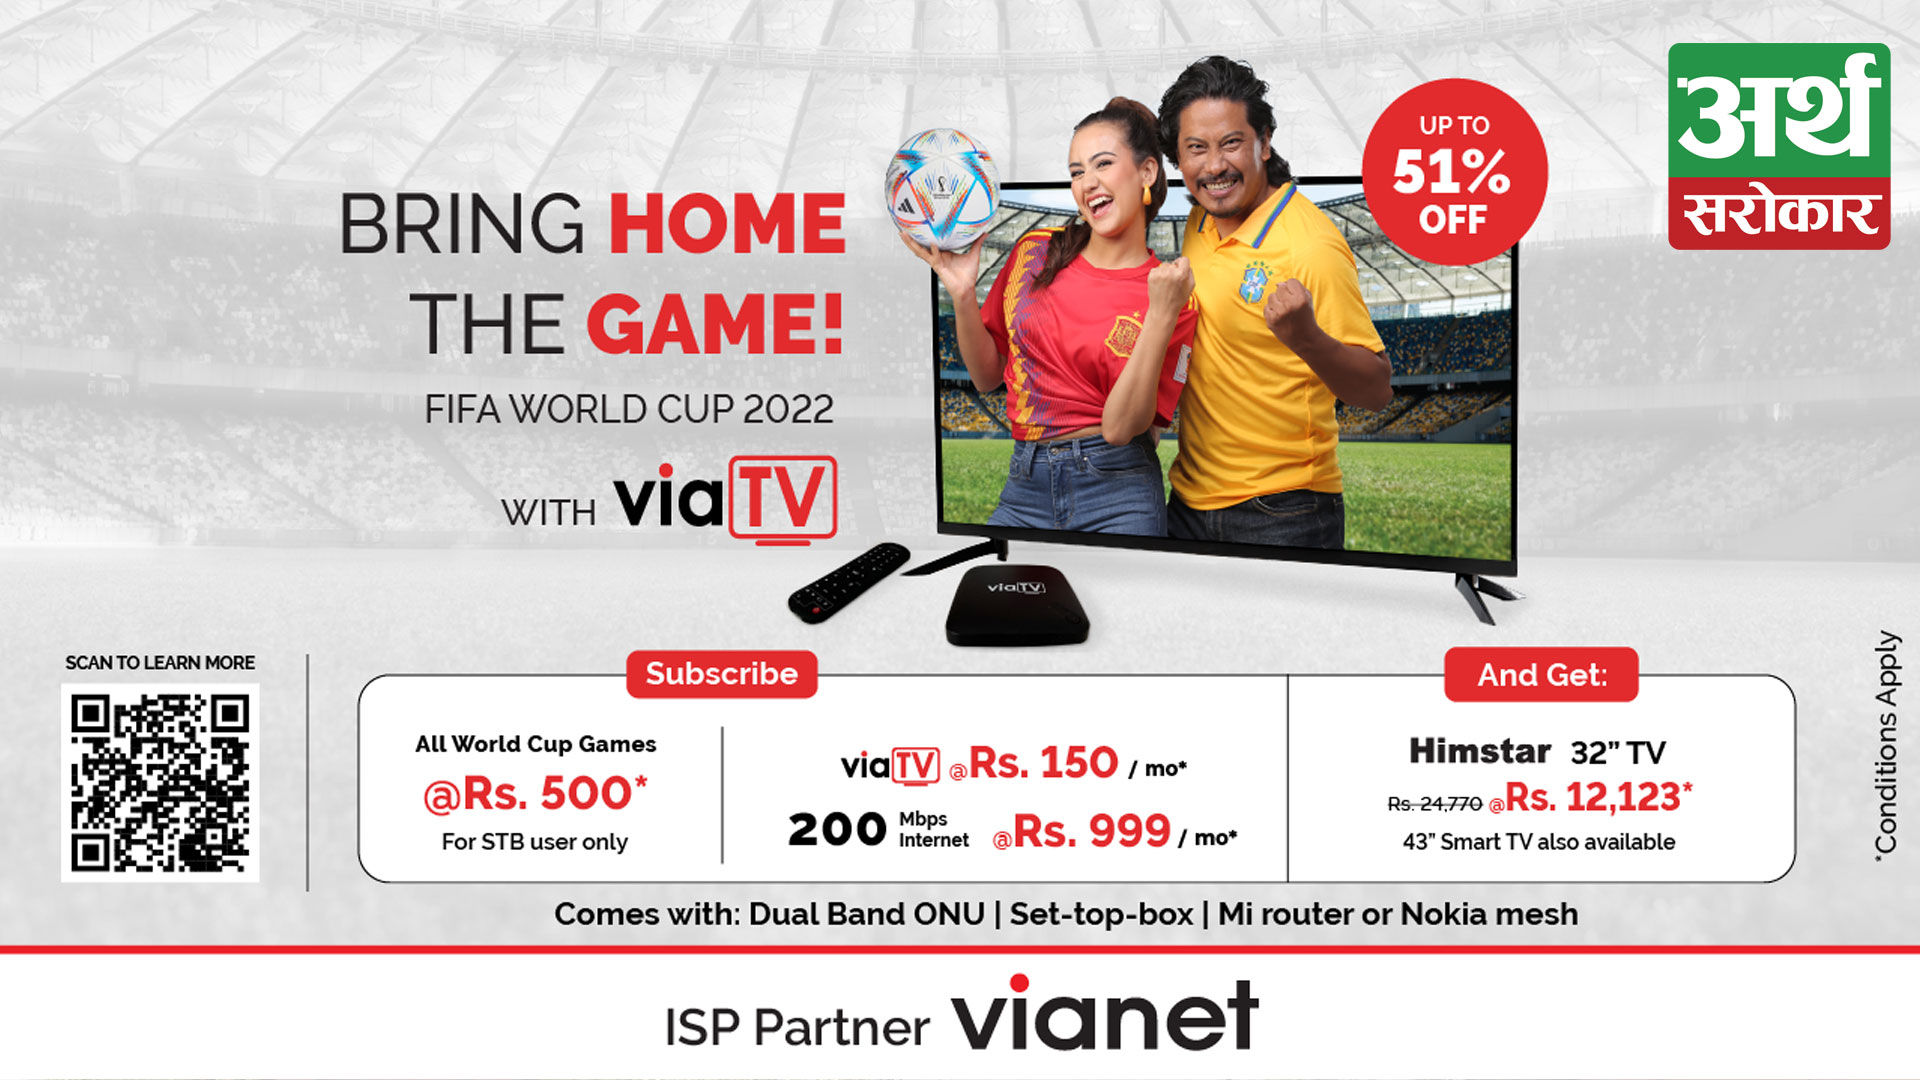 ViaTV launches an exciting offer for the upcoming world cup, viaTV subscribers can get up to 51% off new Himstar TV sets